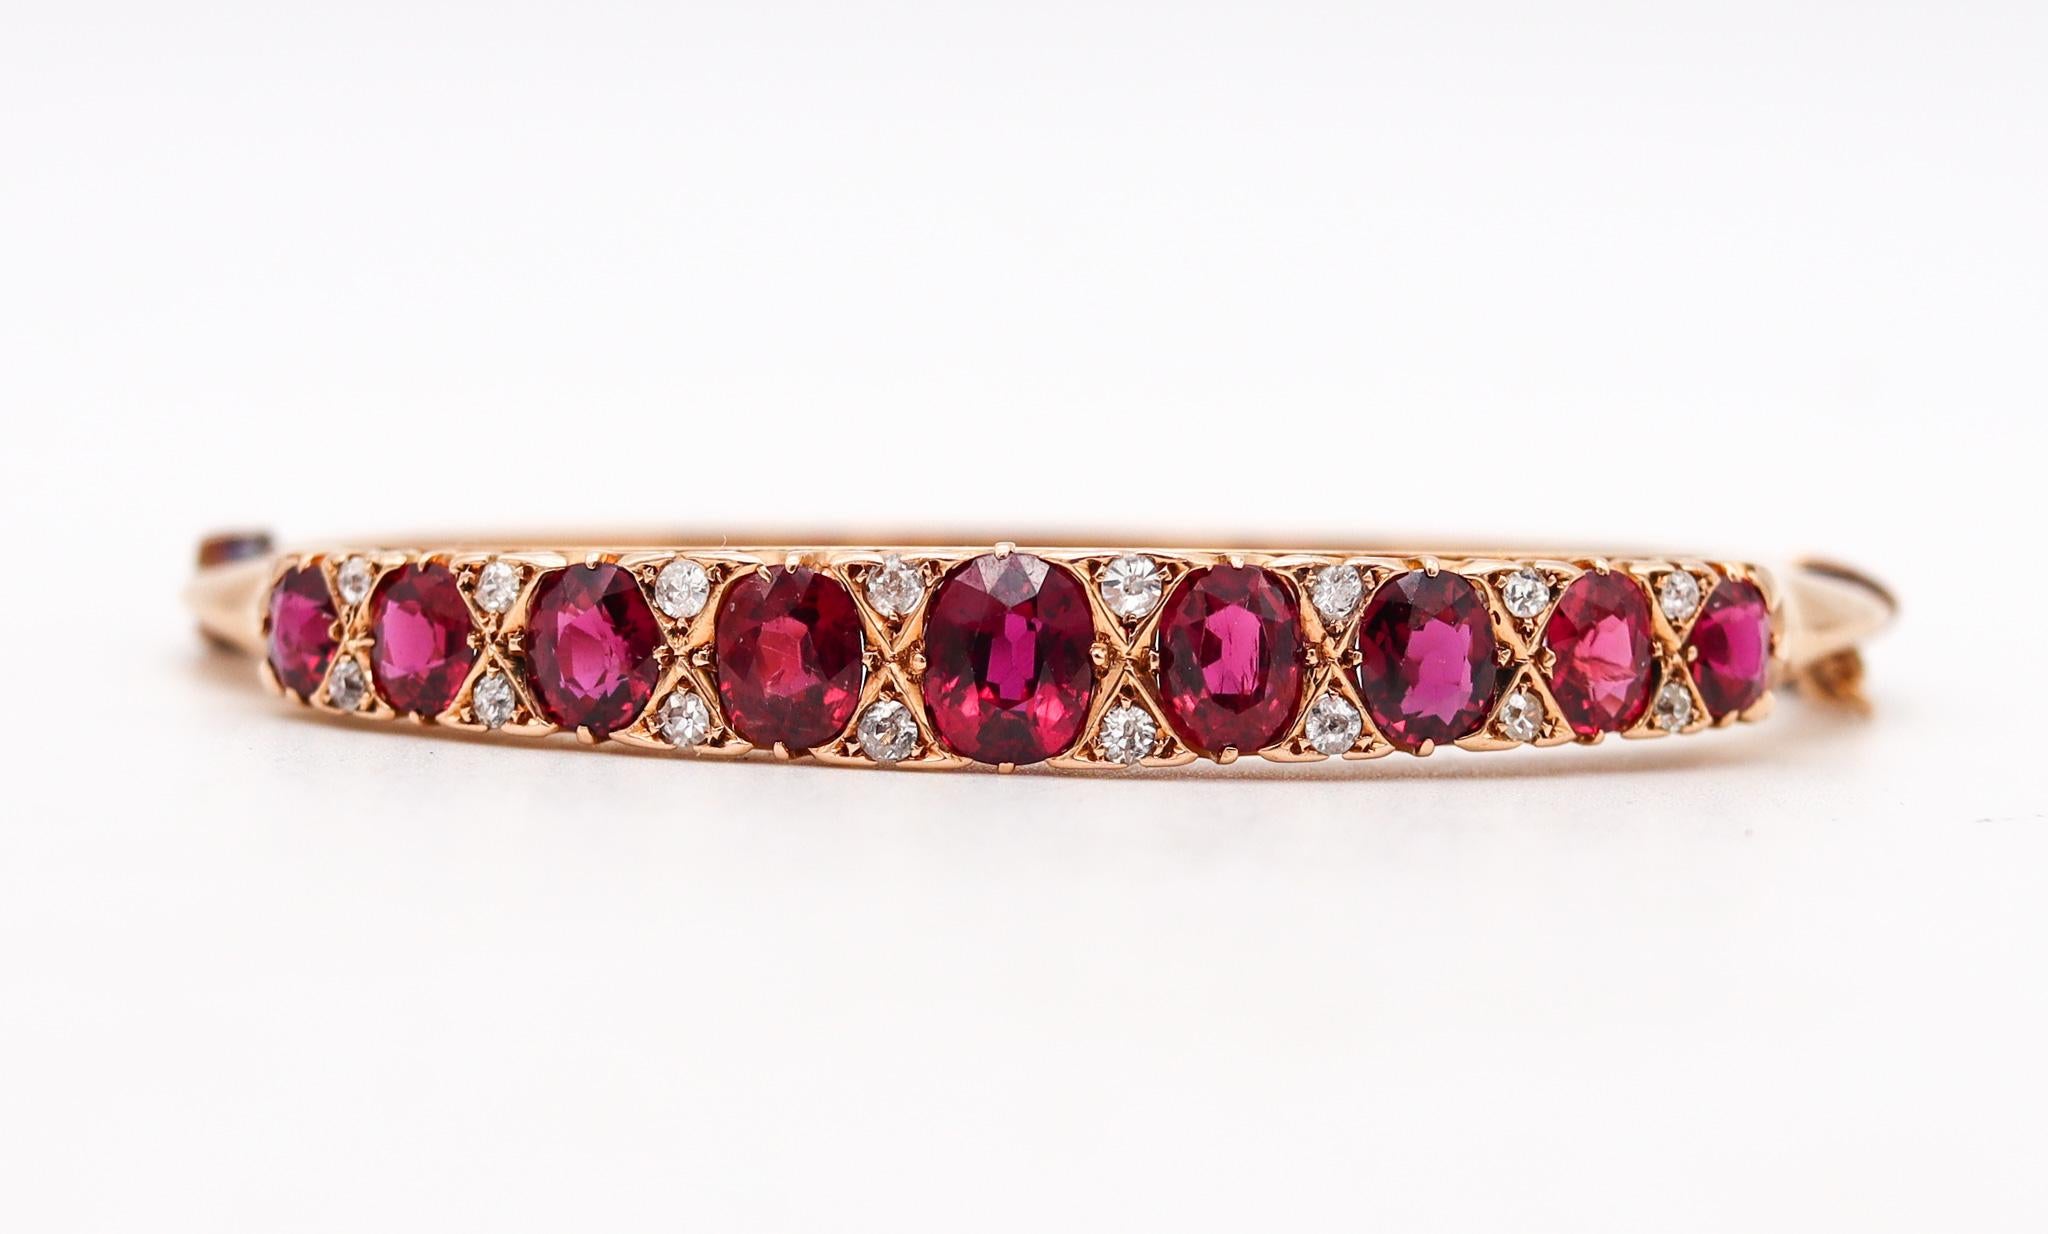 Cushion Cut Victorian 1880 Bangle Bracelet In 15kt Gold With 14.35 Ctw Rubies And Diamonds